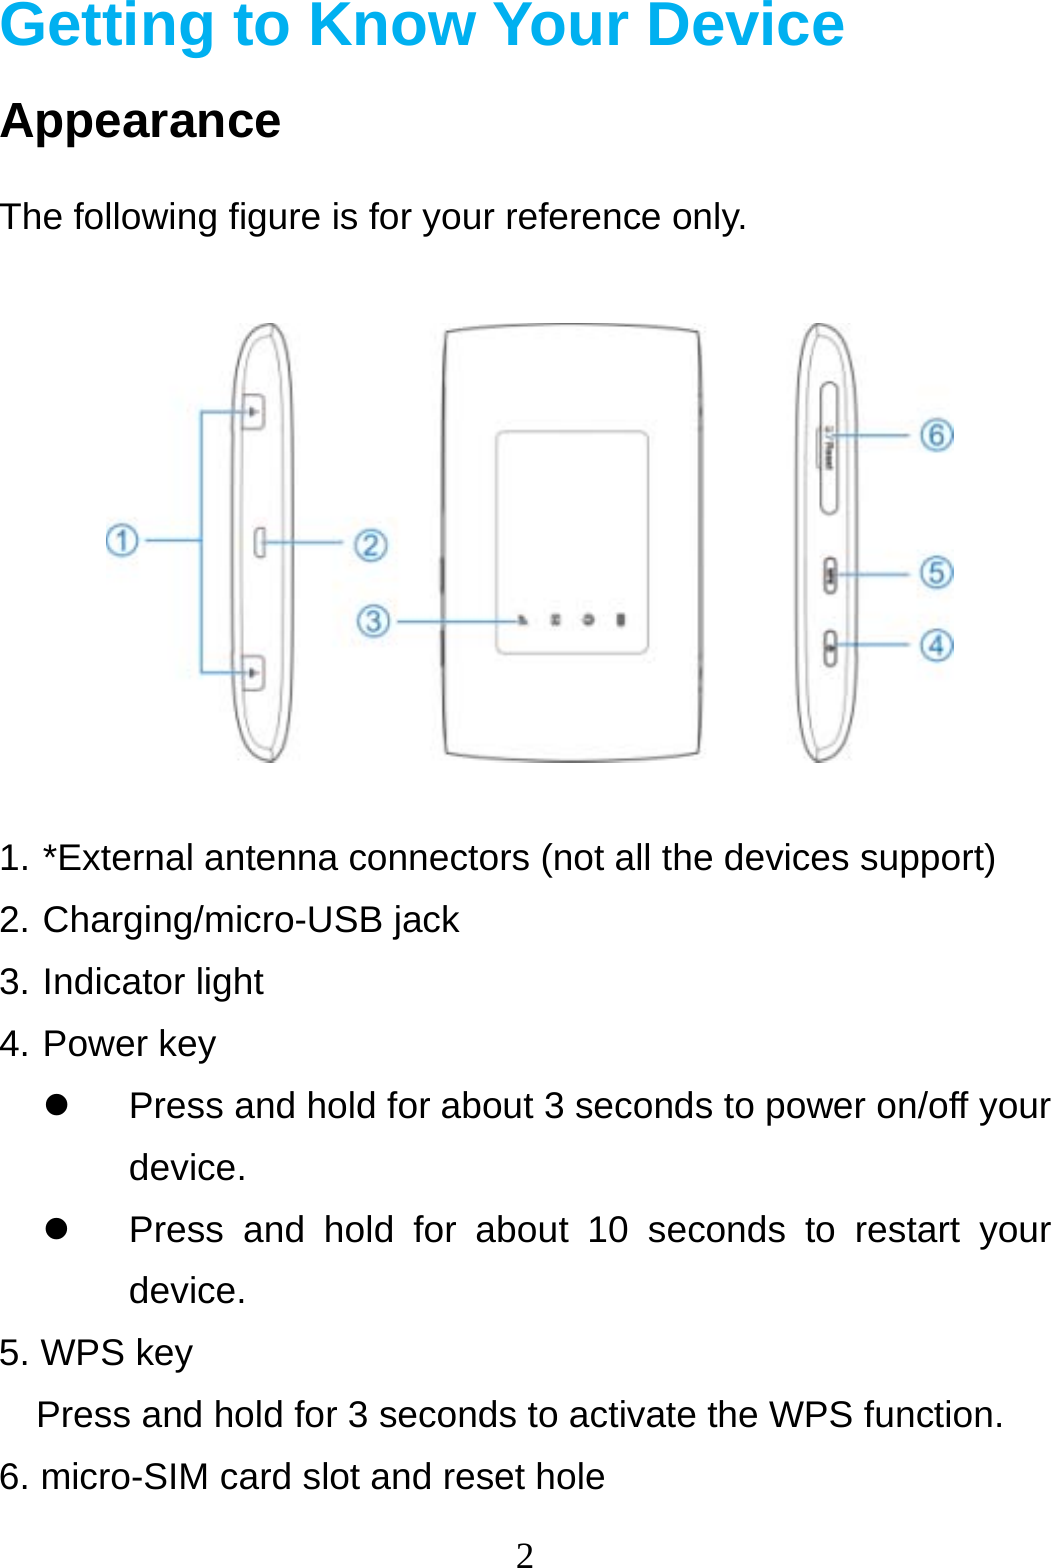 2  Getting to Know Your Device Appearance The following figure is for your reference only.  1. *External antenna connectors (not all the devices support) 2. Charging/micro-USB jack  3. Indicator light 4. Power key    Press and hold for about 3 seconds to power on/off your device.   Press and hold for about 10 seconds to restart your device.  5. WPS key Press and hold for 3 seconds to activate the WPS function. 6. micro-SIM card slot and reset hole 